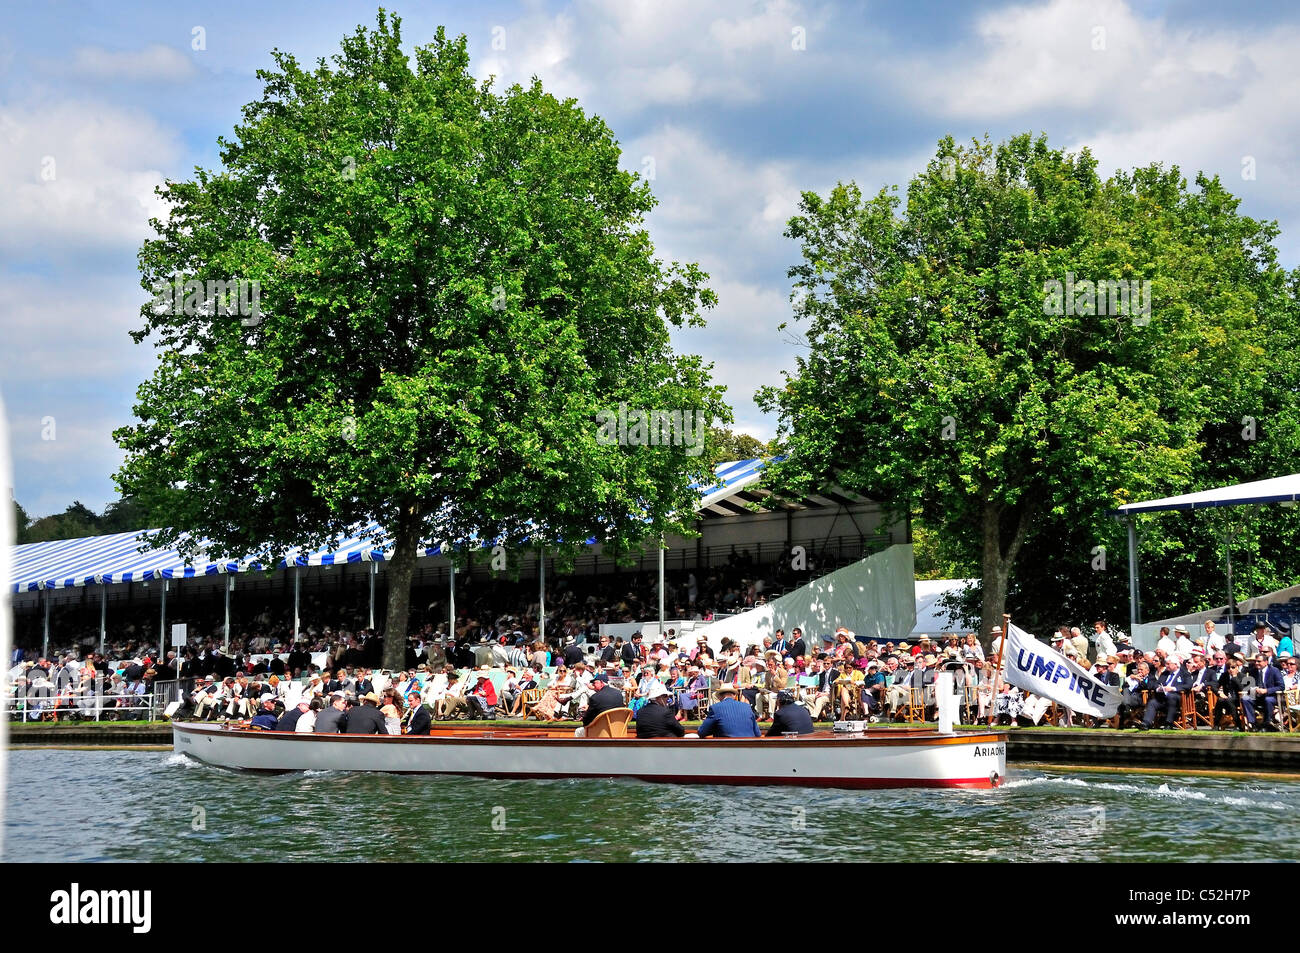 View of Henley Royal Regatta Stewards's Enclosure with umpire launch travelling to the start, Henley-on-Thames, Oxfordshire, UK Stock Photo